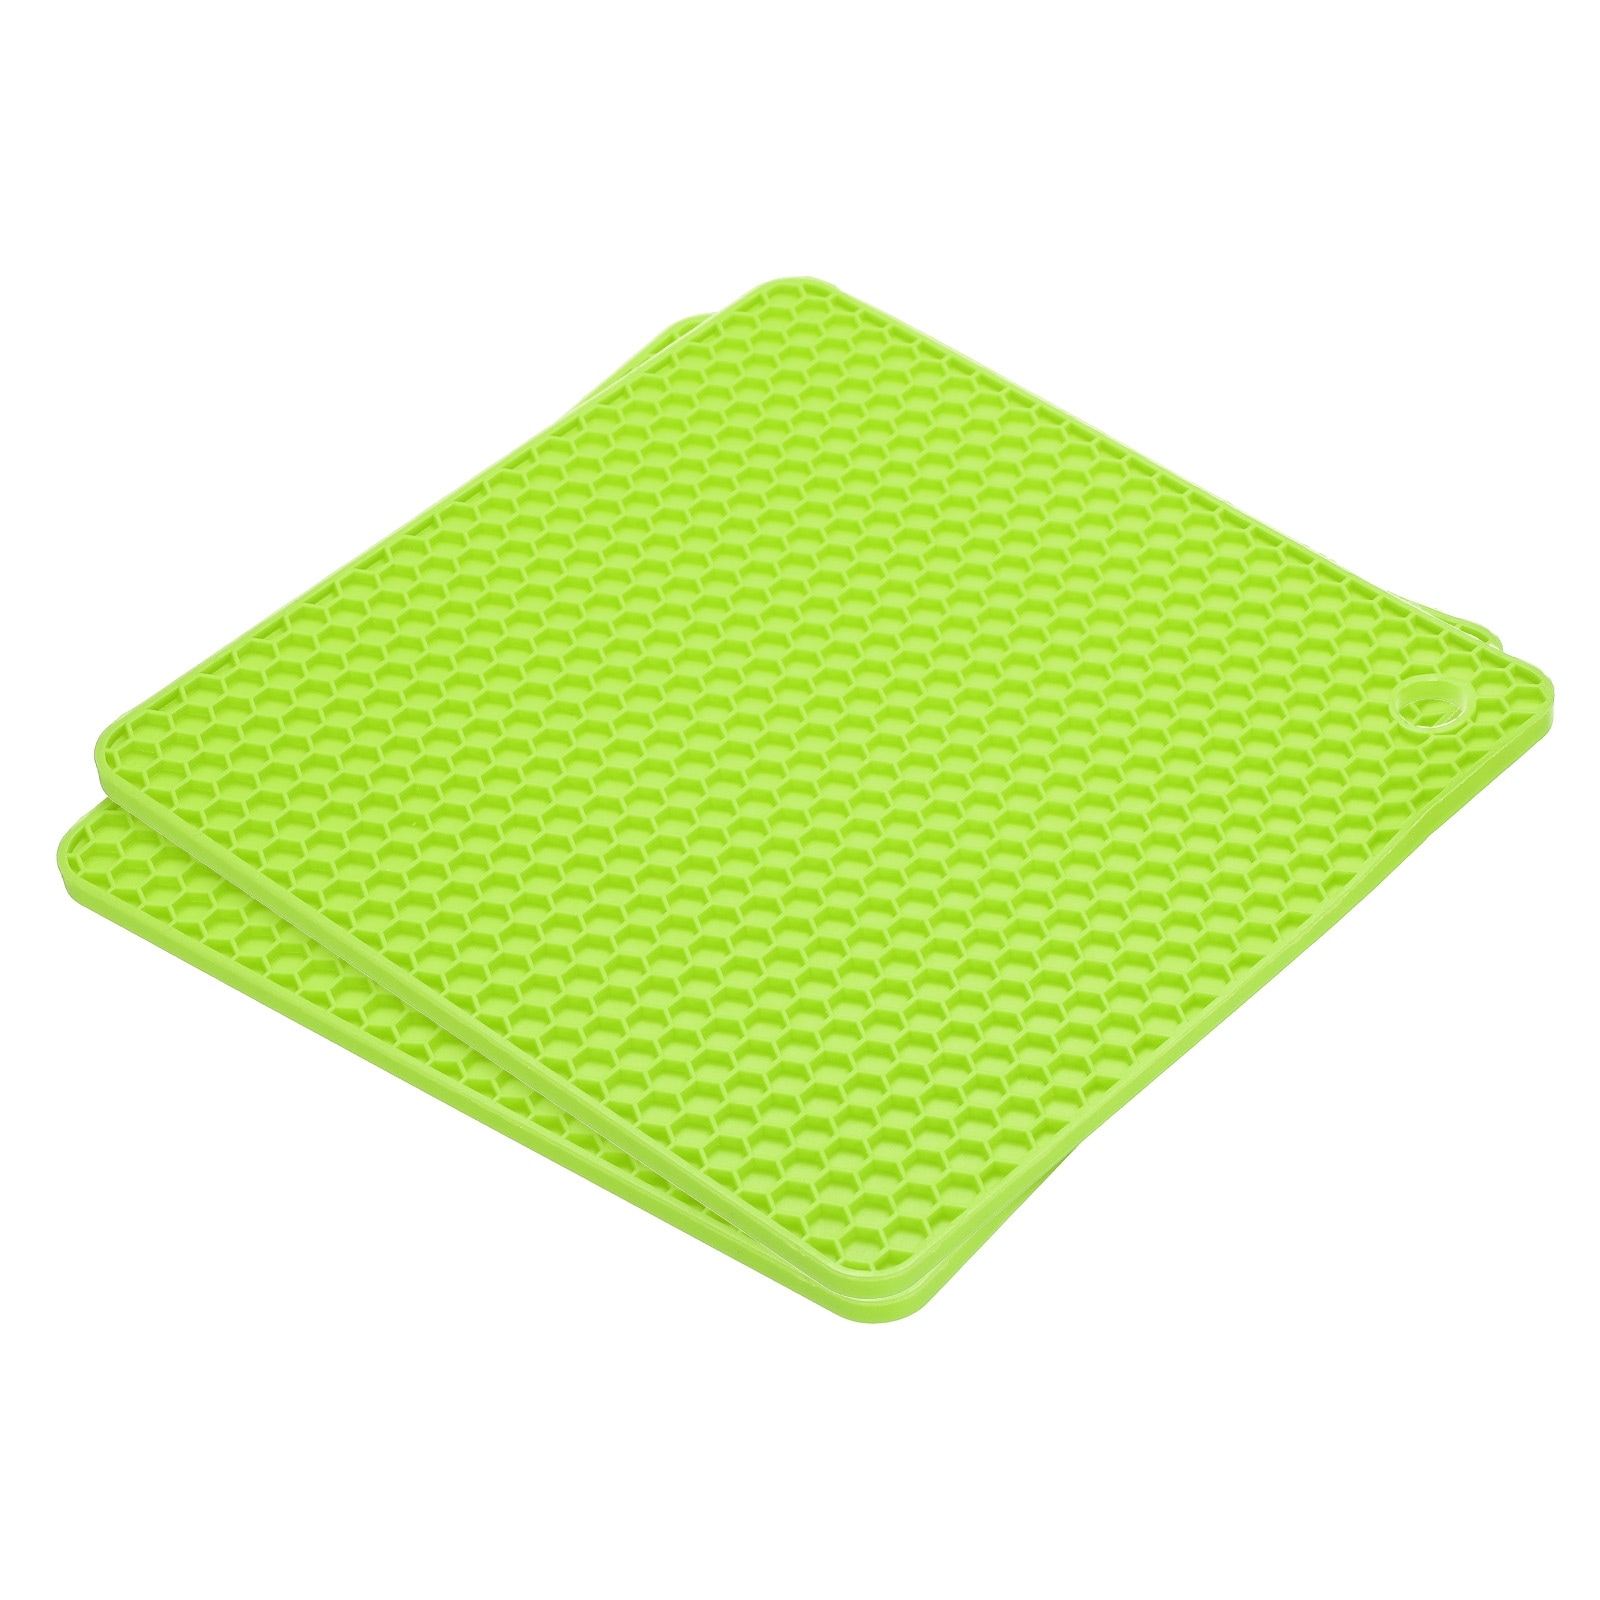 https://ak1.ostkcdn.com/images/products/is/images/direct/9129d3f58bba0cebeebf6487d53a002990555399/Silicone-Trivet-Mats-2pcs%2C-Square-Hot-Pan-Pads-Hot-Pot-Holder---Green.jpg